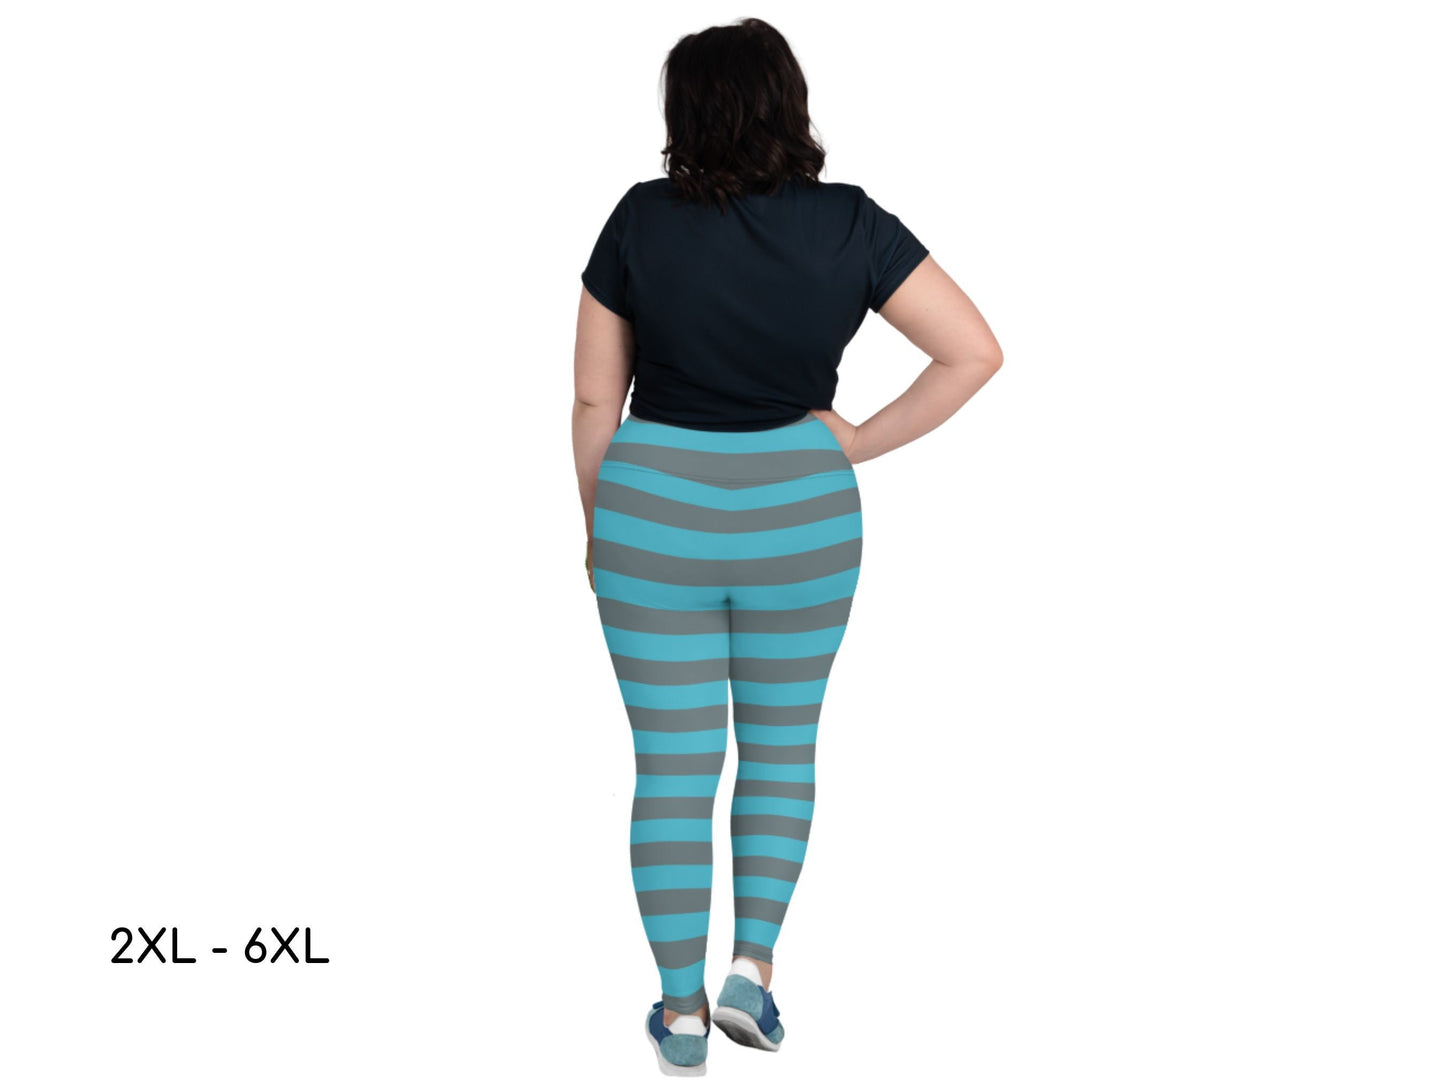 Cheshire Cat Blue Plus Size Yoga Leggings, Alice in Wonderland, Halloween Adult Costume, Cosplay, Sexy BBW, Gift for Her, Birthday Gift